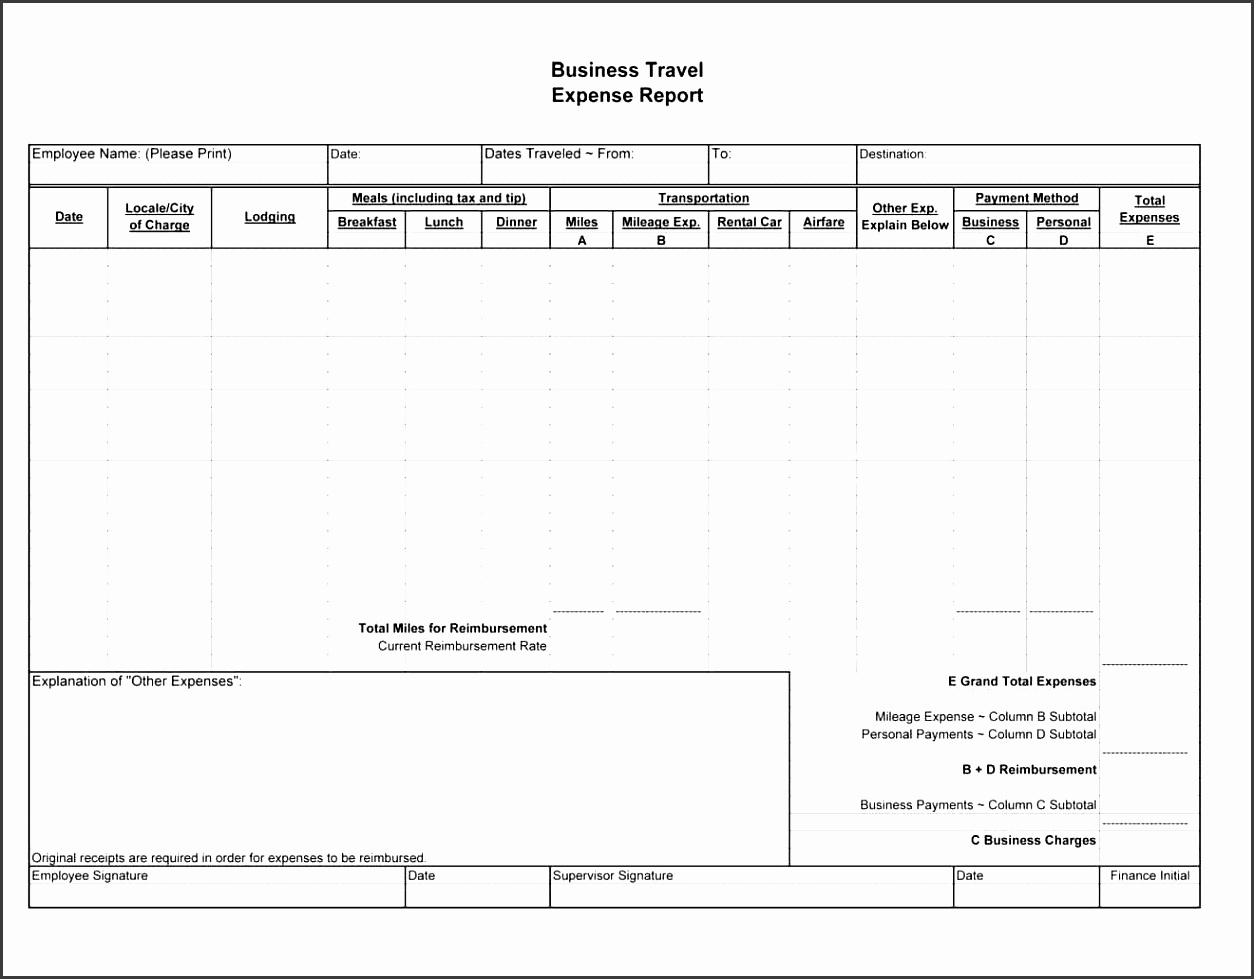 image for business trip expense report template